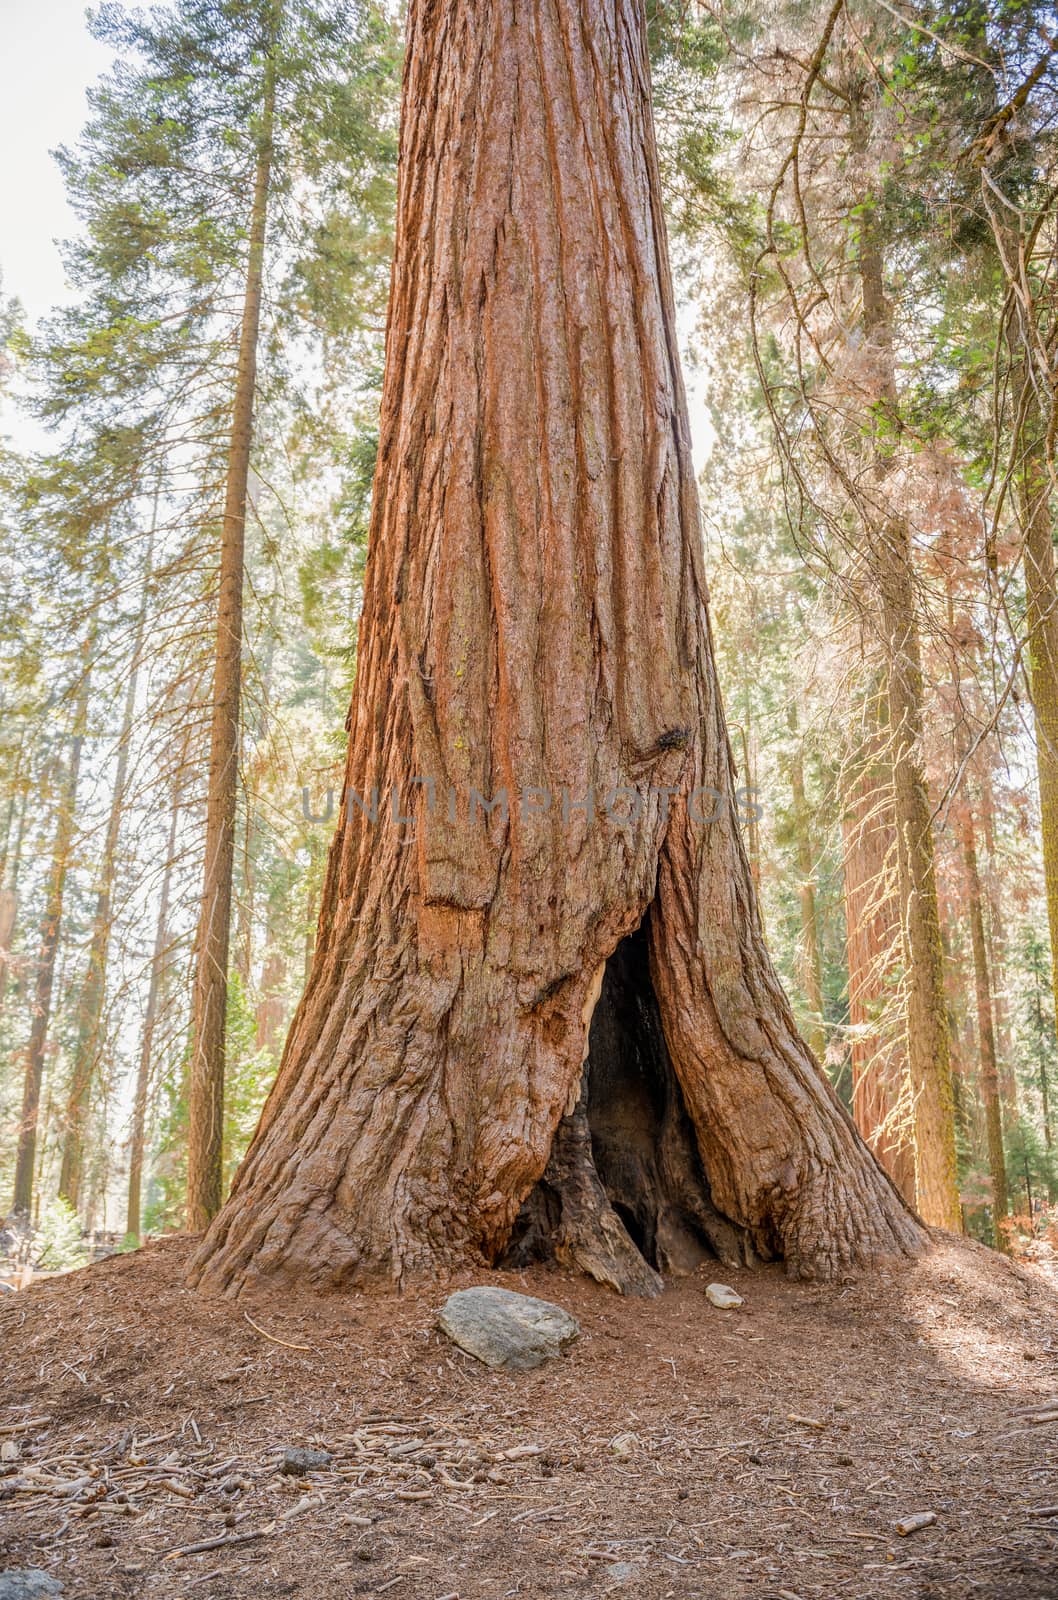 Trunk of a giant sequoia in Sequoia National Park, California by Njean